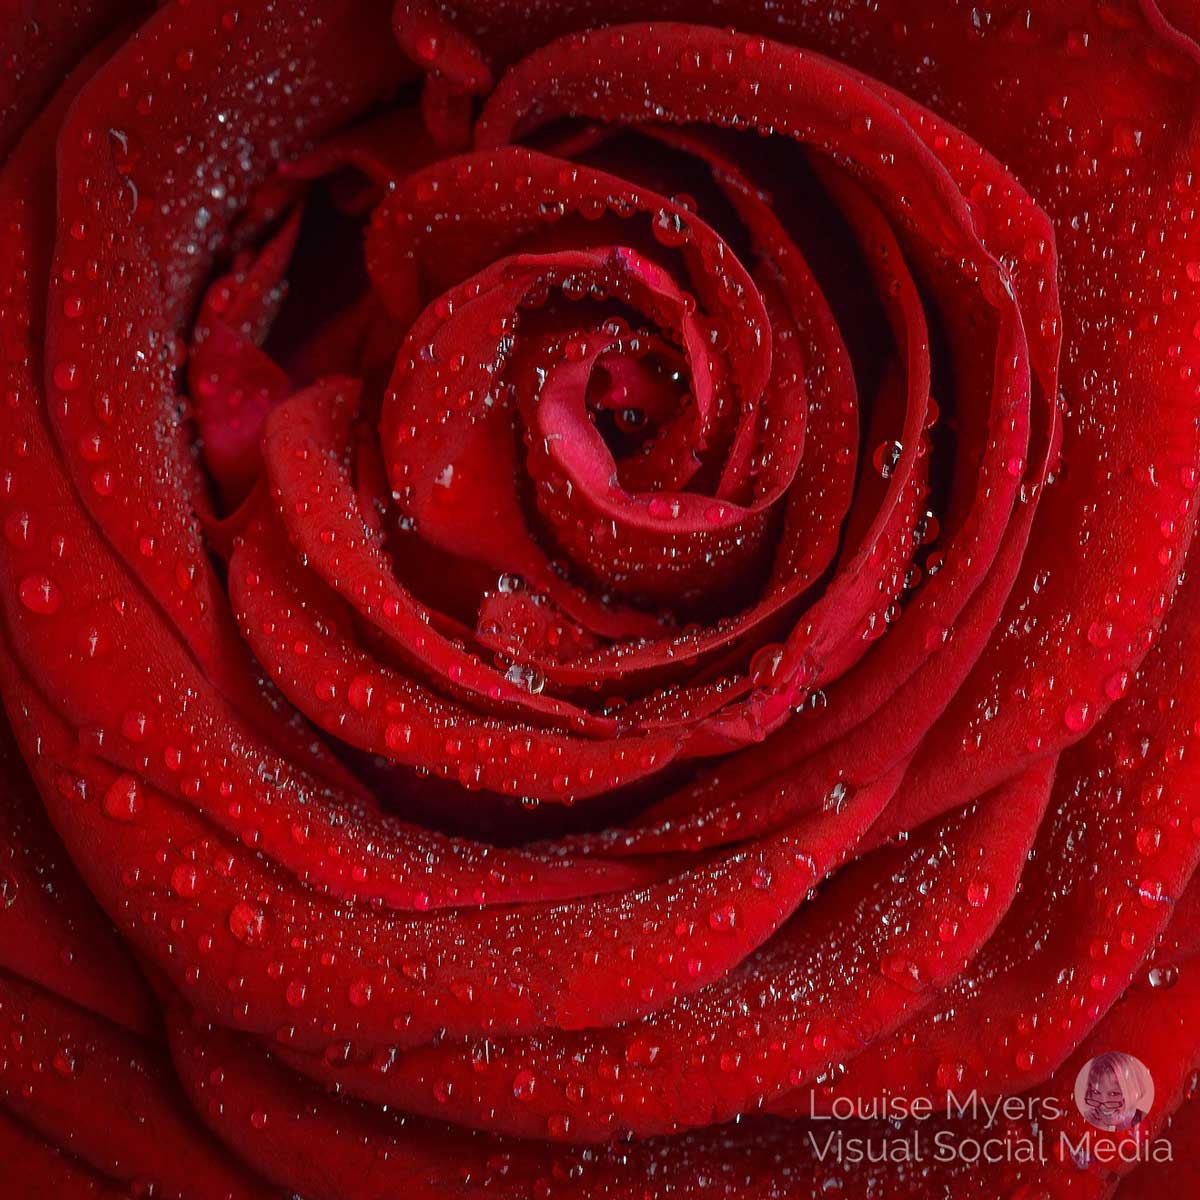 red rose sparkling with dew drops.